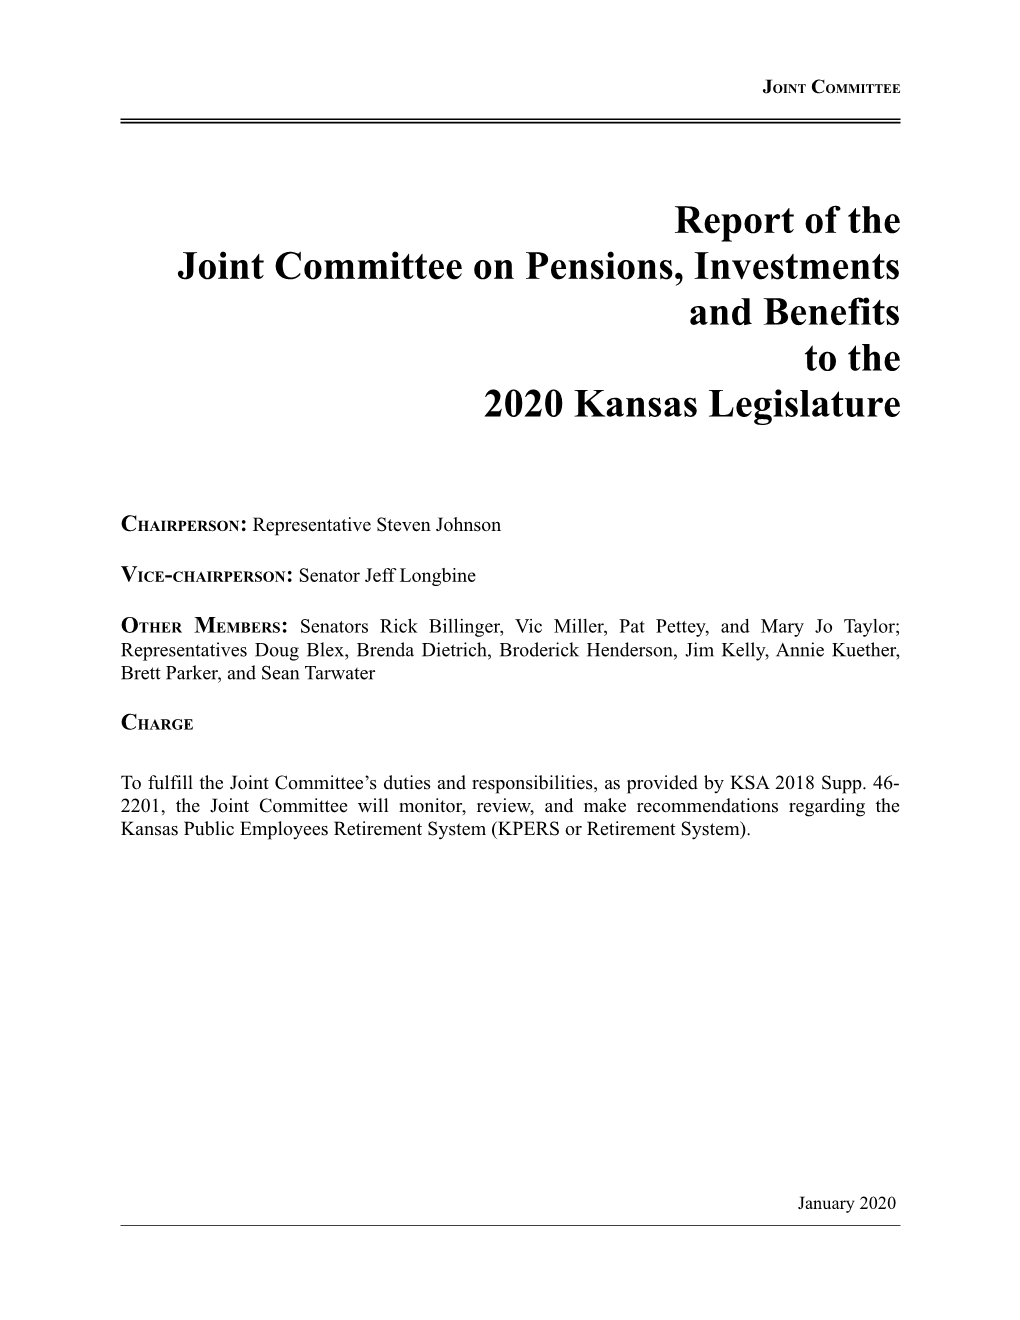 Report of the Joint Committee on Pensions, Investments, And